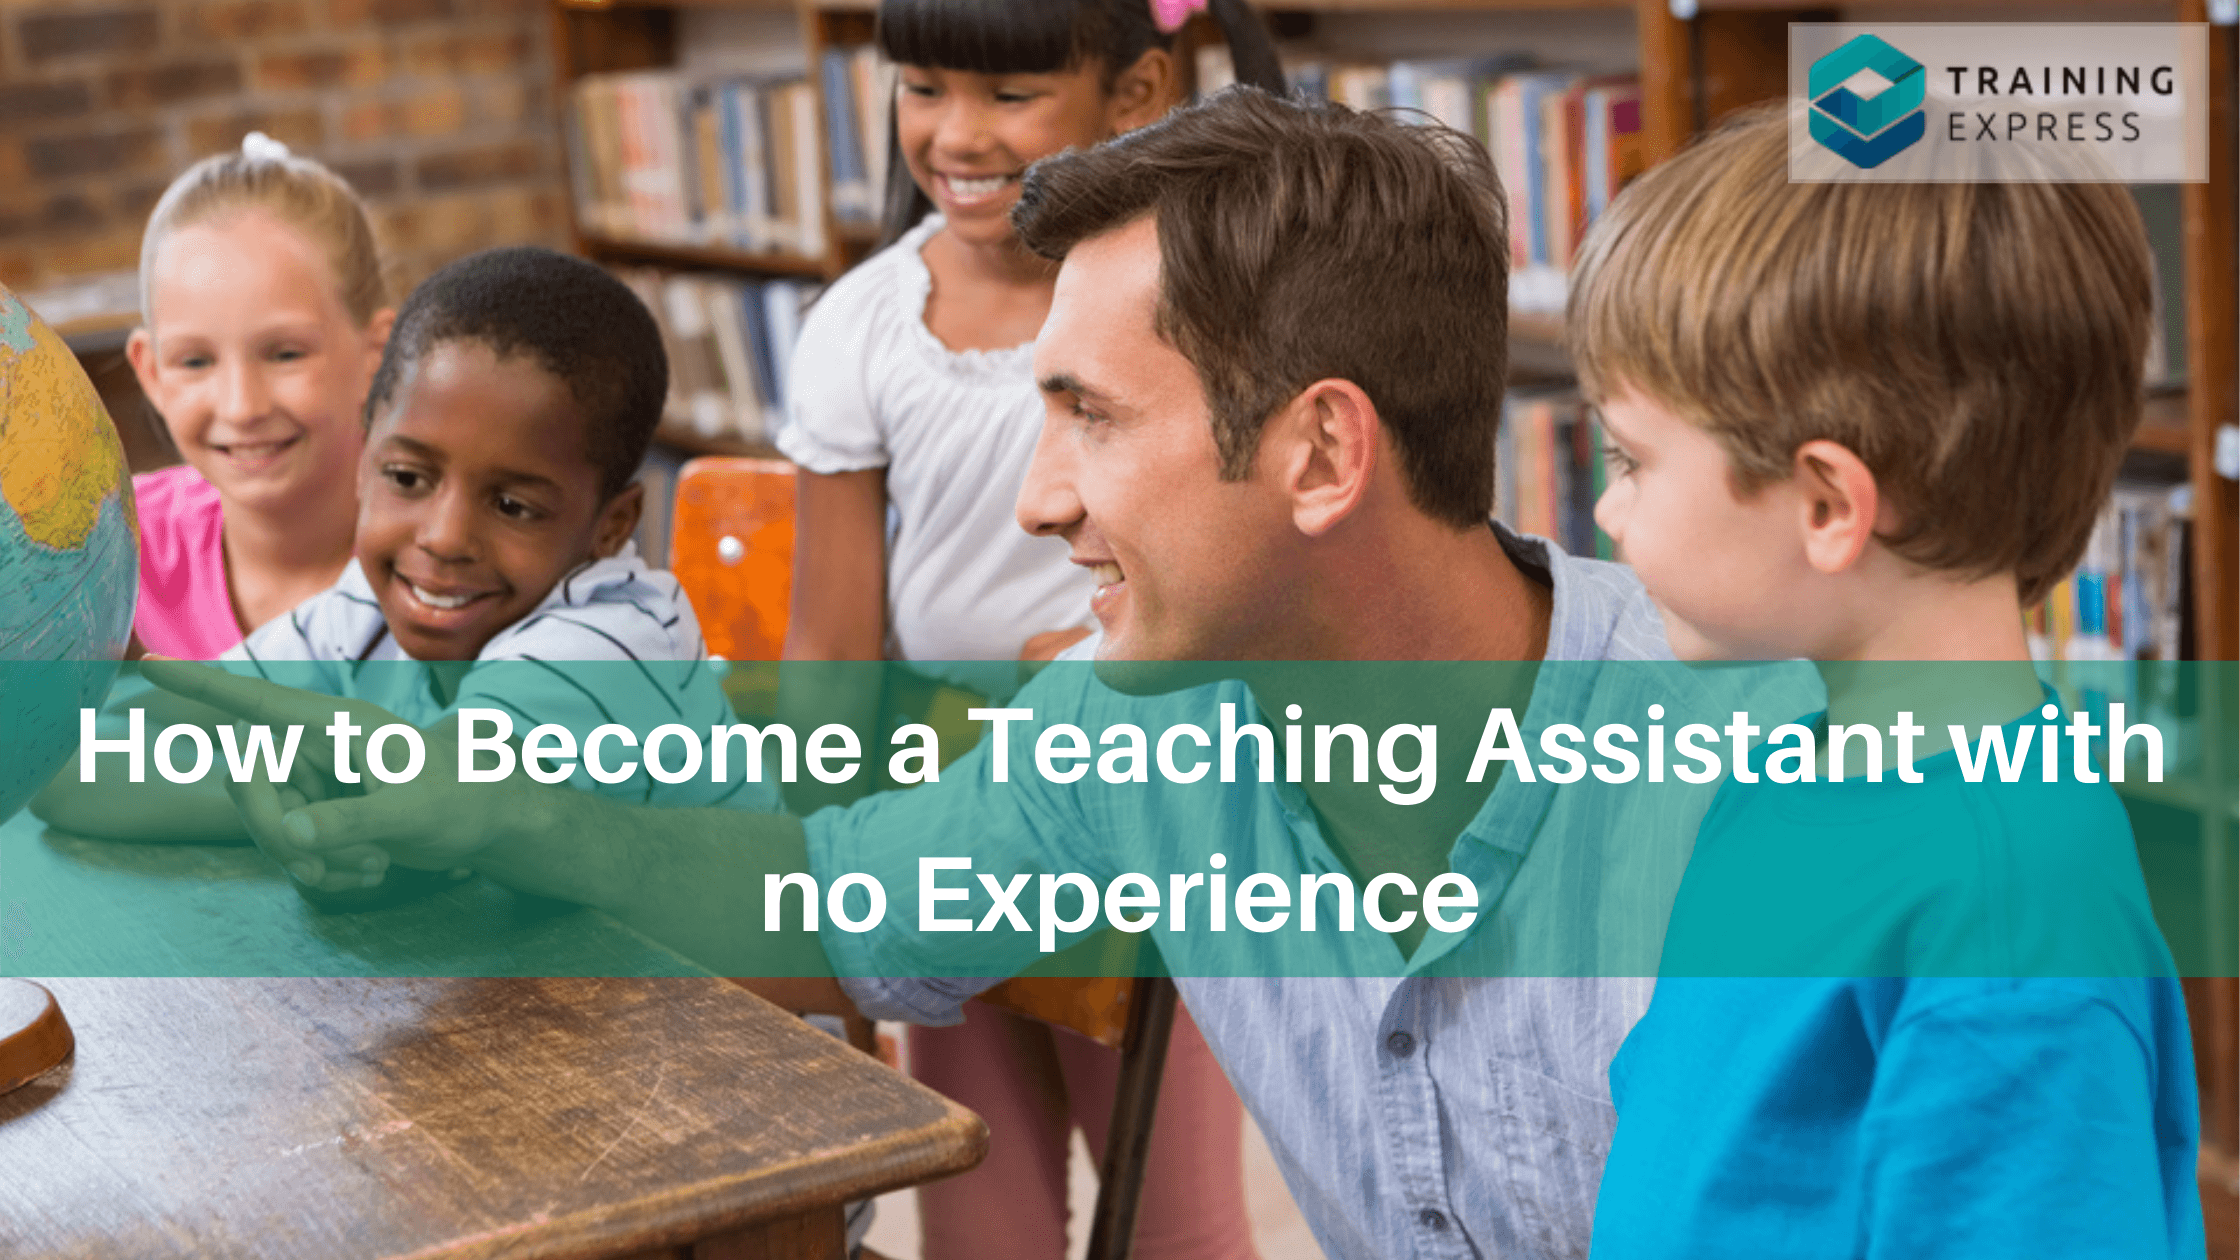 How to Become a Teaching Assistant with no Experience